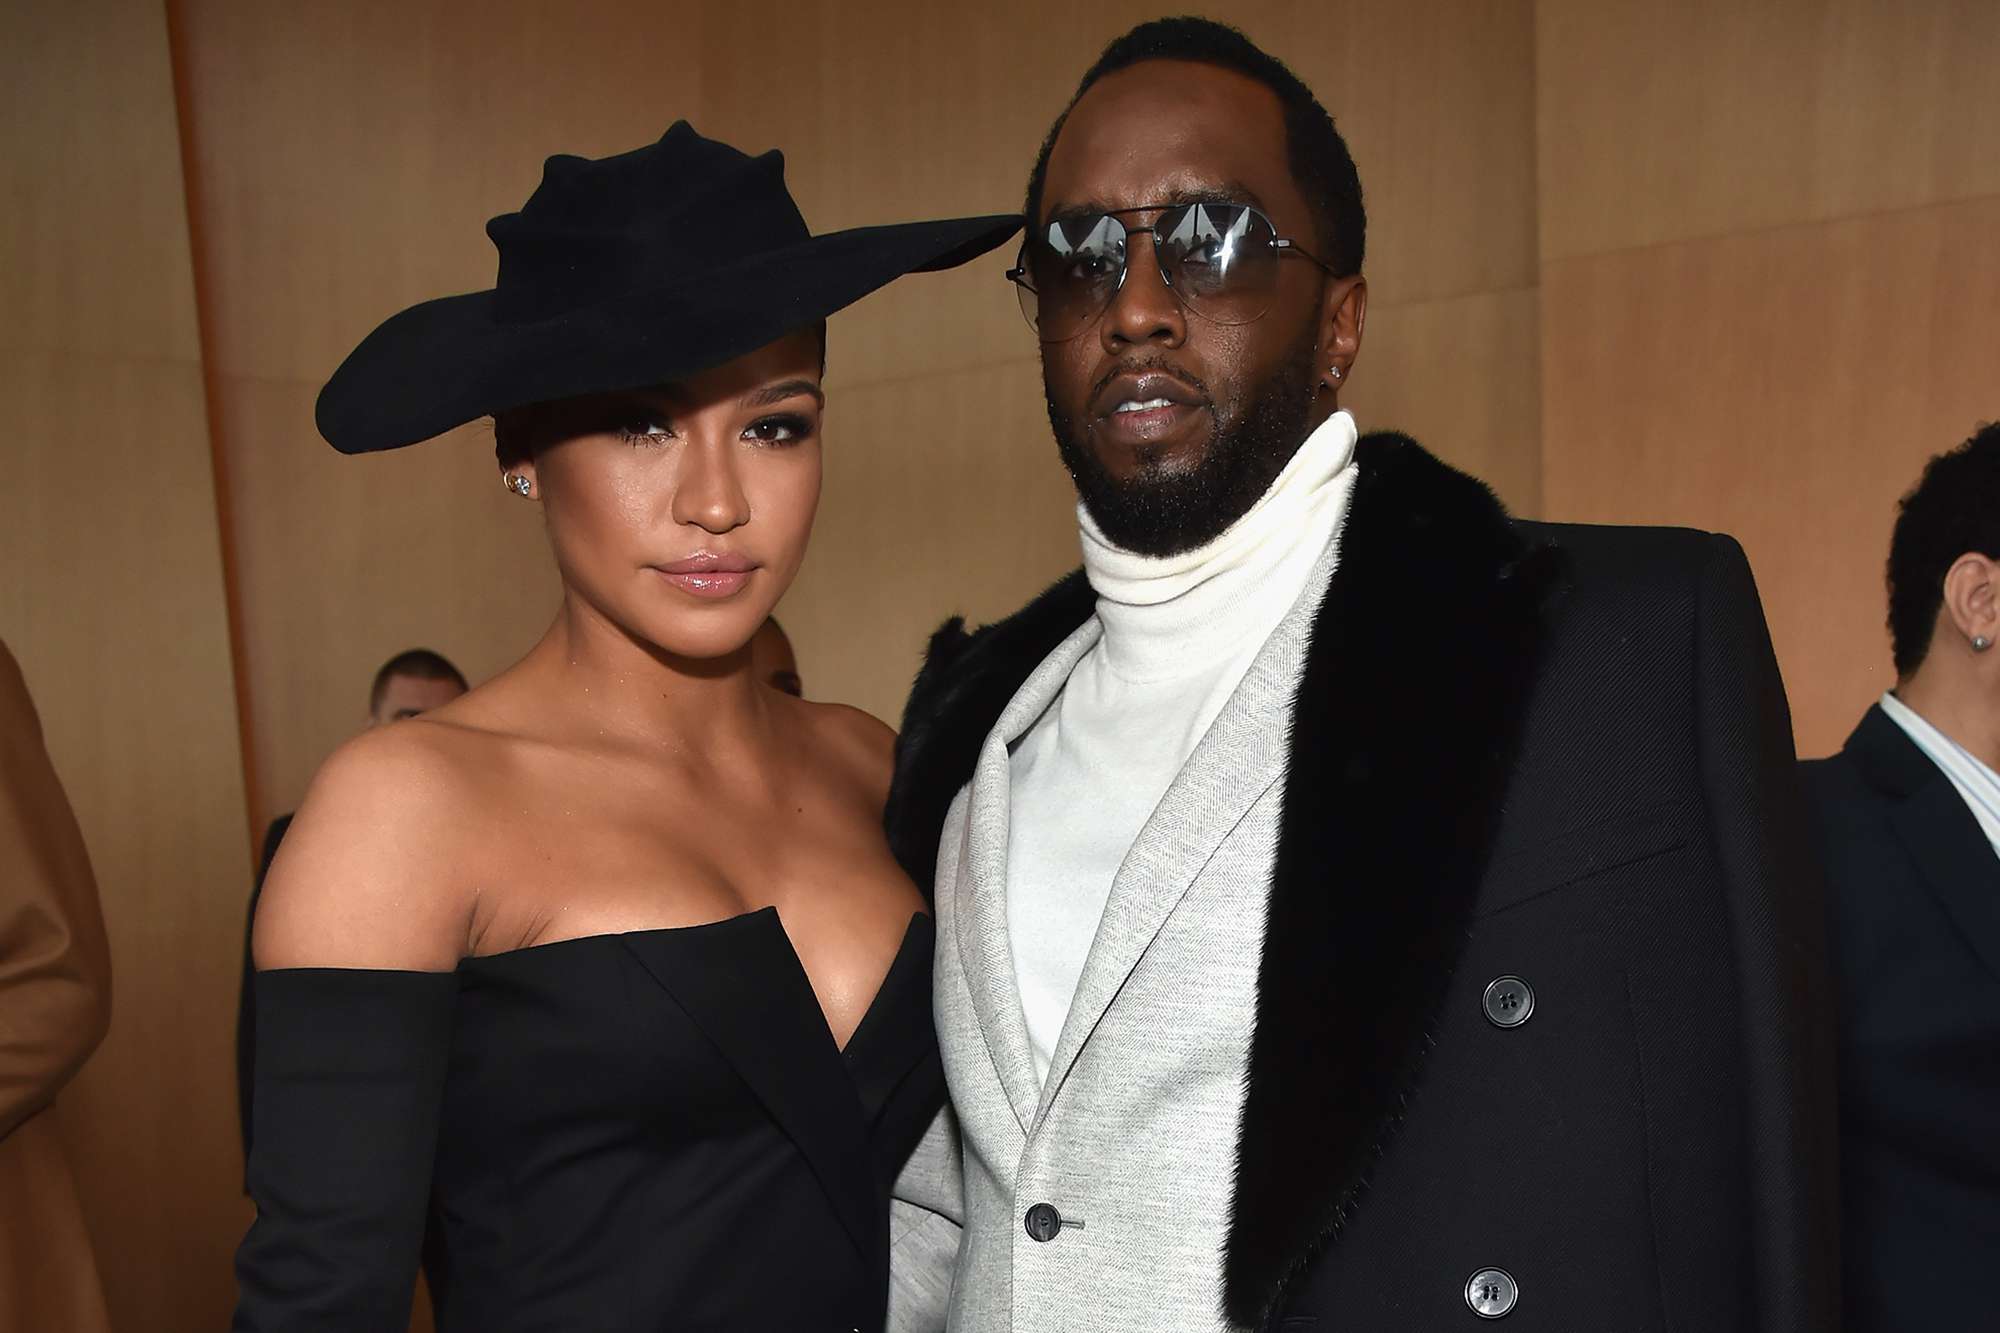 Sean 'Diddy' Combs Allegedly Paid $50K to Obtain Hotel Security Footage of Cassie Assault: Lawsuit